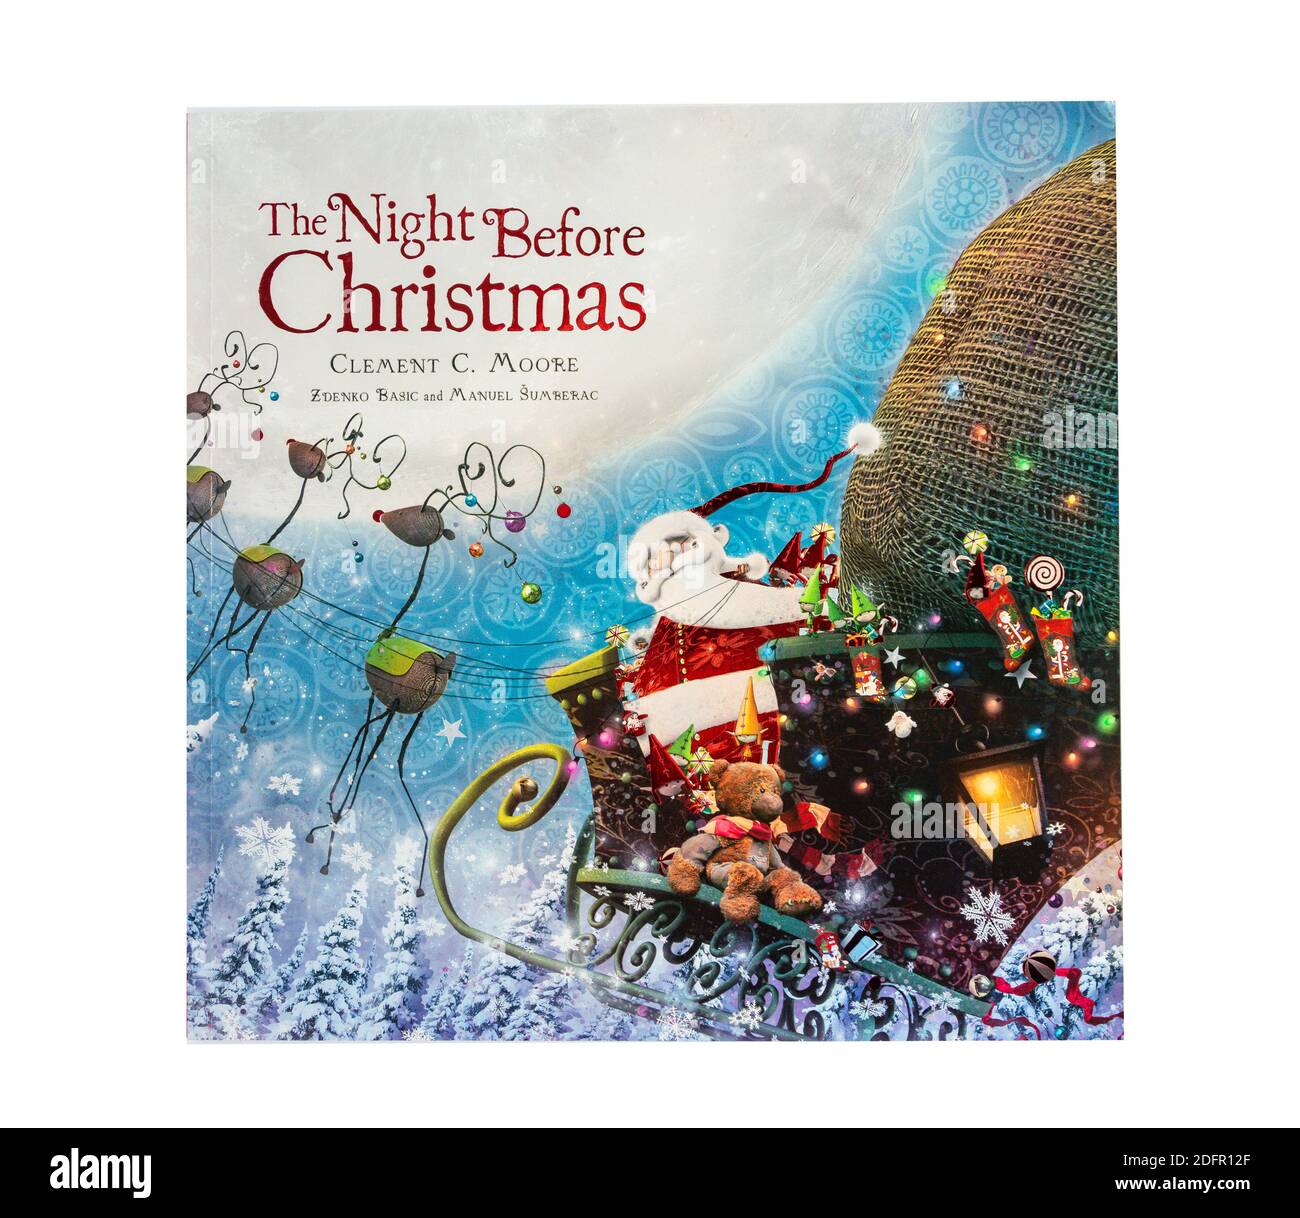 The Night Before Christmas Kinderbuch von Clement.C.Moore, Greater London, England, united Kingdom Stockfoto